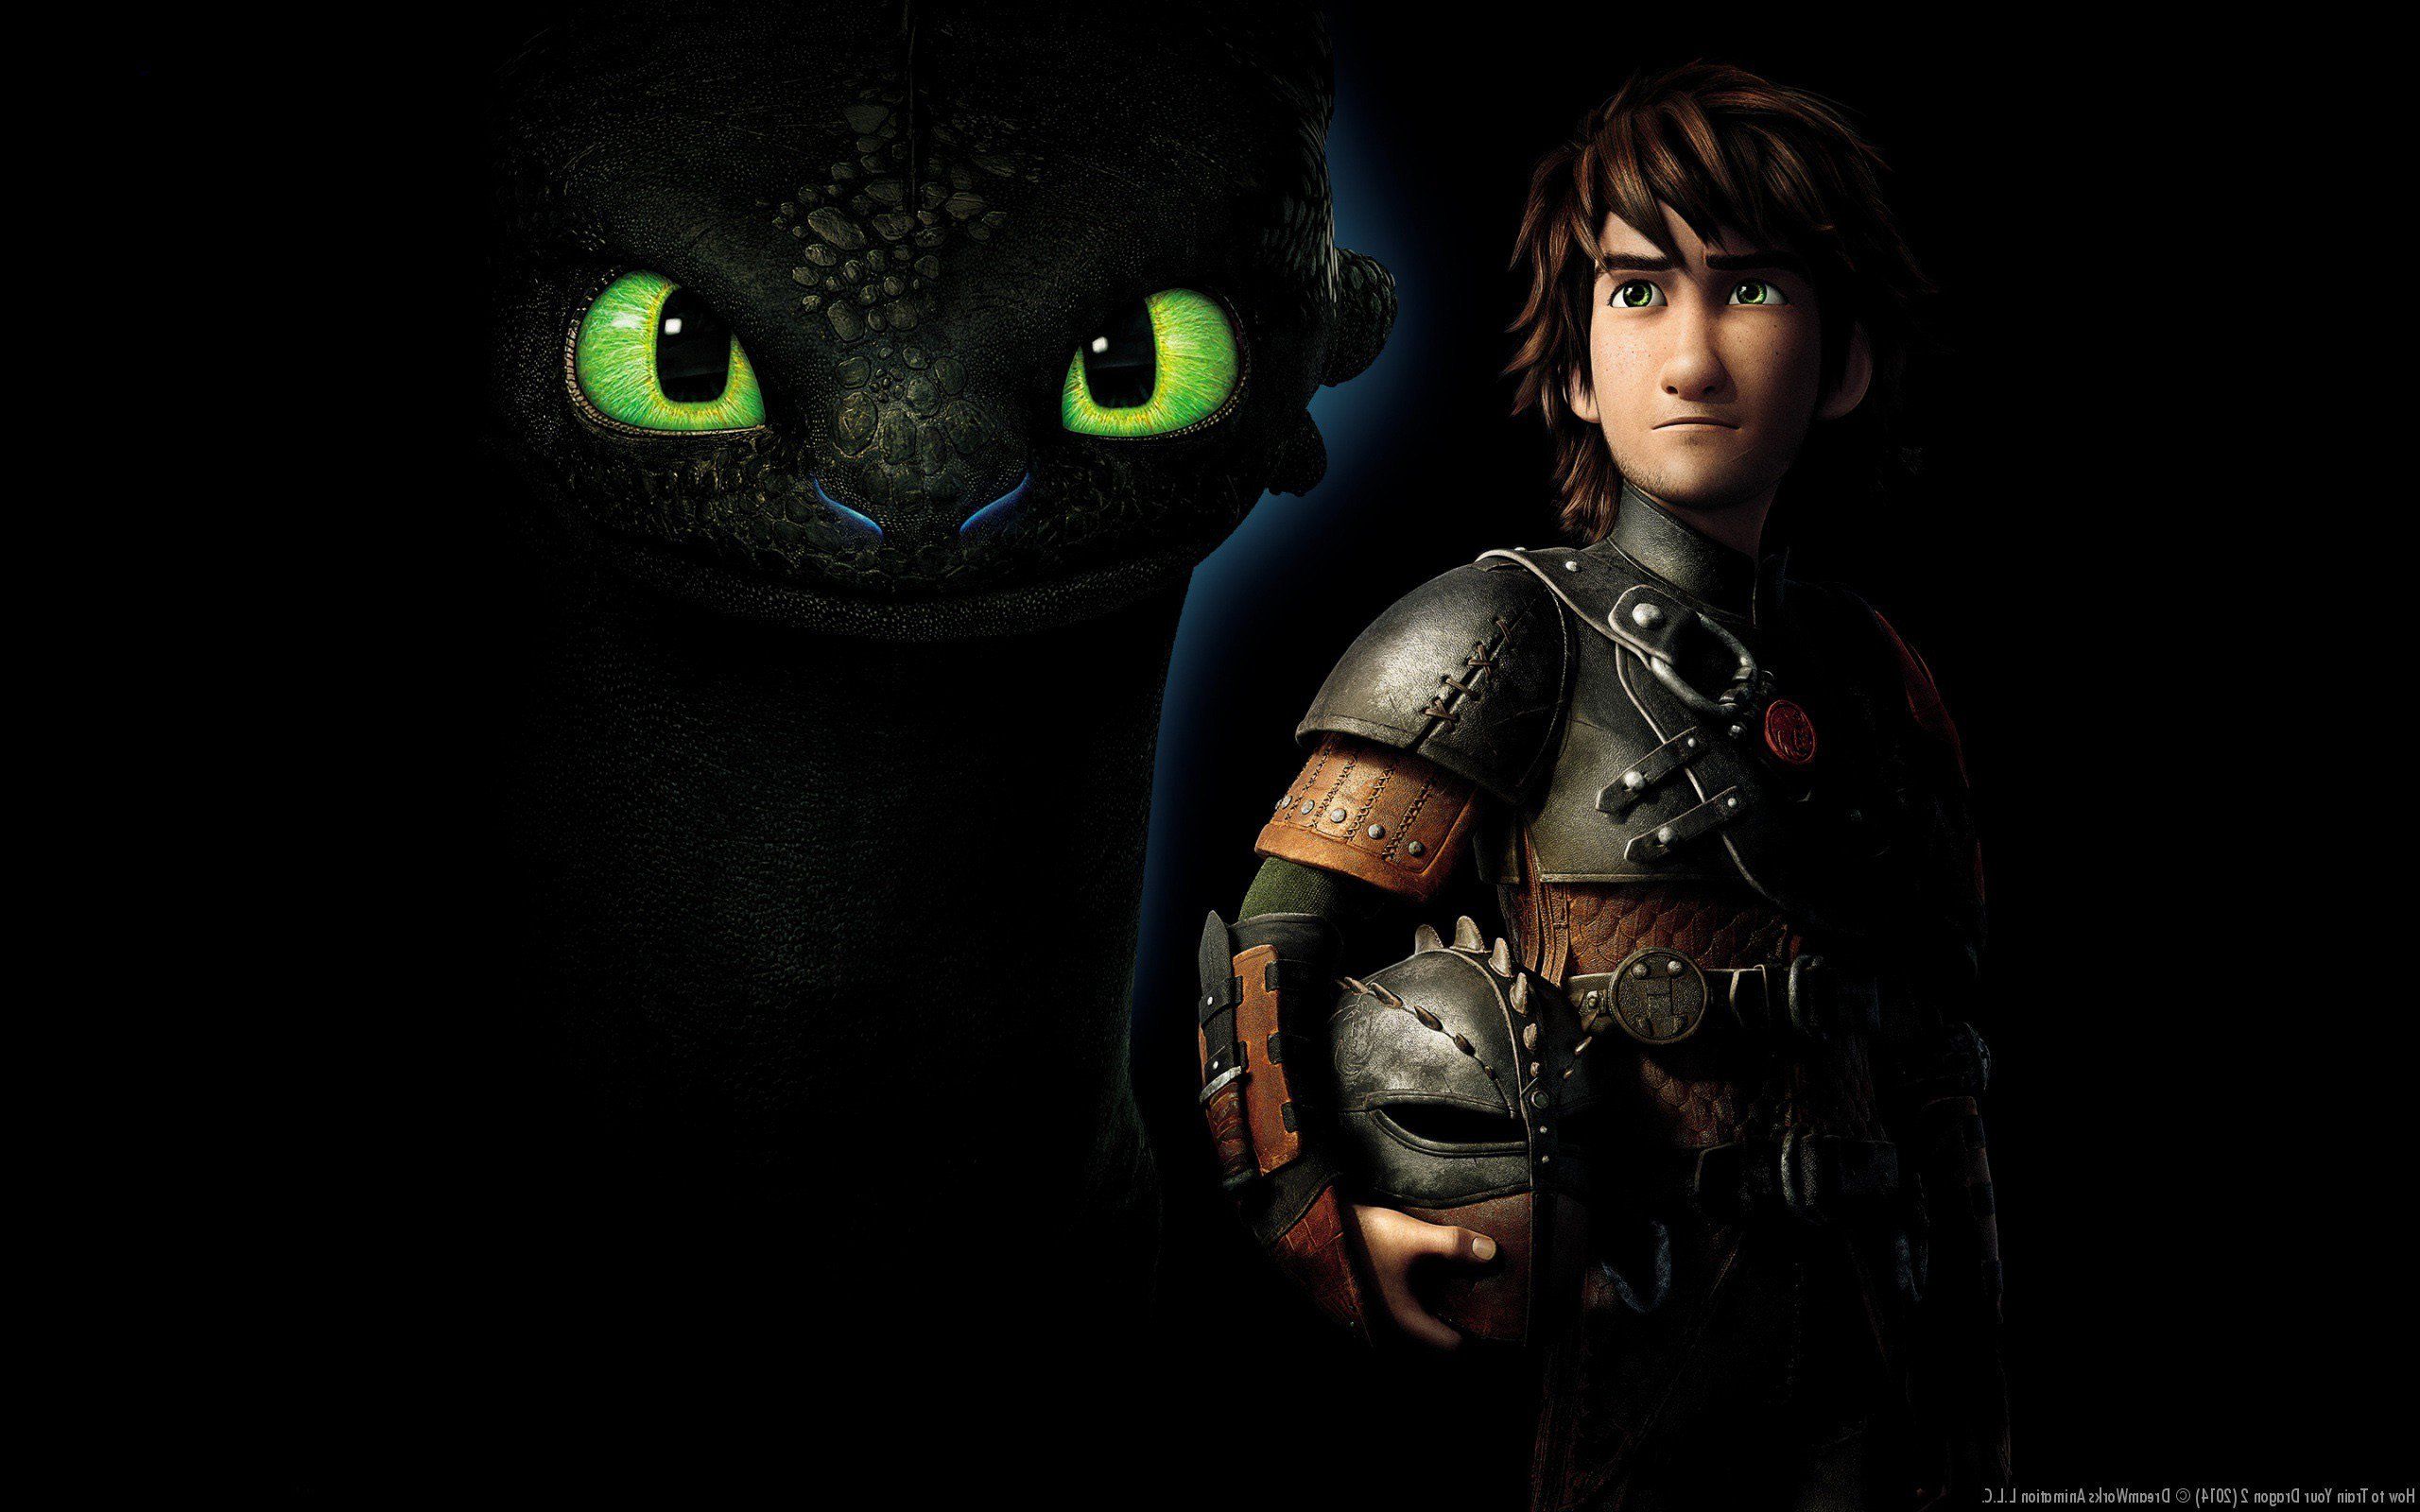 How To's Wiki 88: How To Train Your Dragon Wallpaper